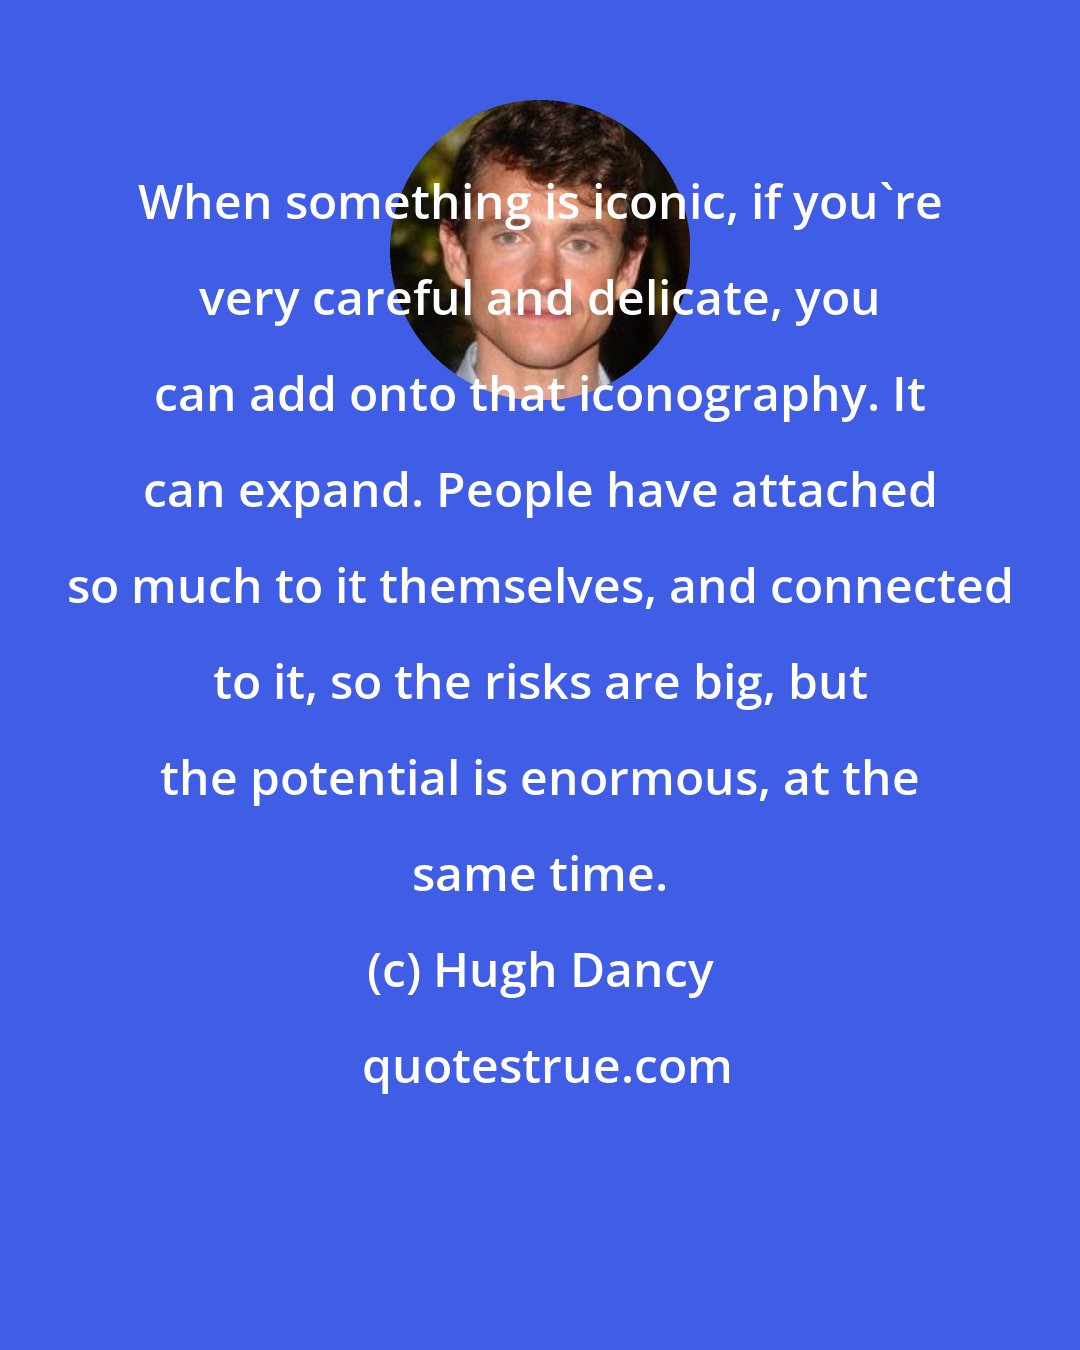 Hugh Dancy: When something is iconic, if you're very careful and delicate, you can add onto that iconography. It can expand. People have attached so much to it themselves, and connected to it, so the risks are big, but the potential is enormous, at the same time.